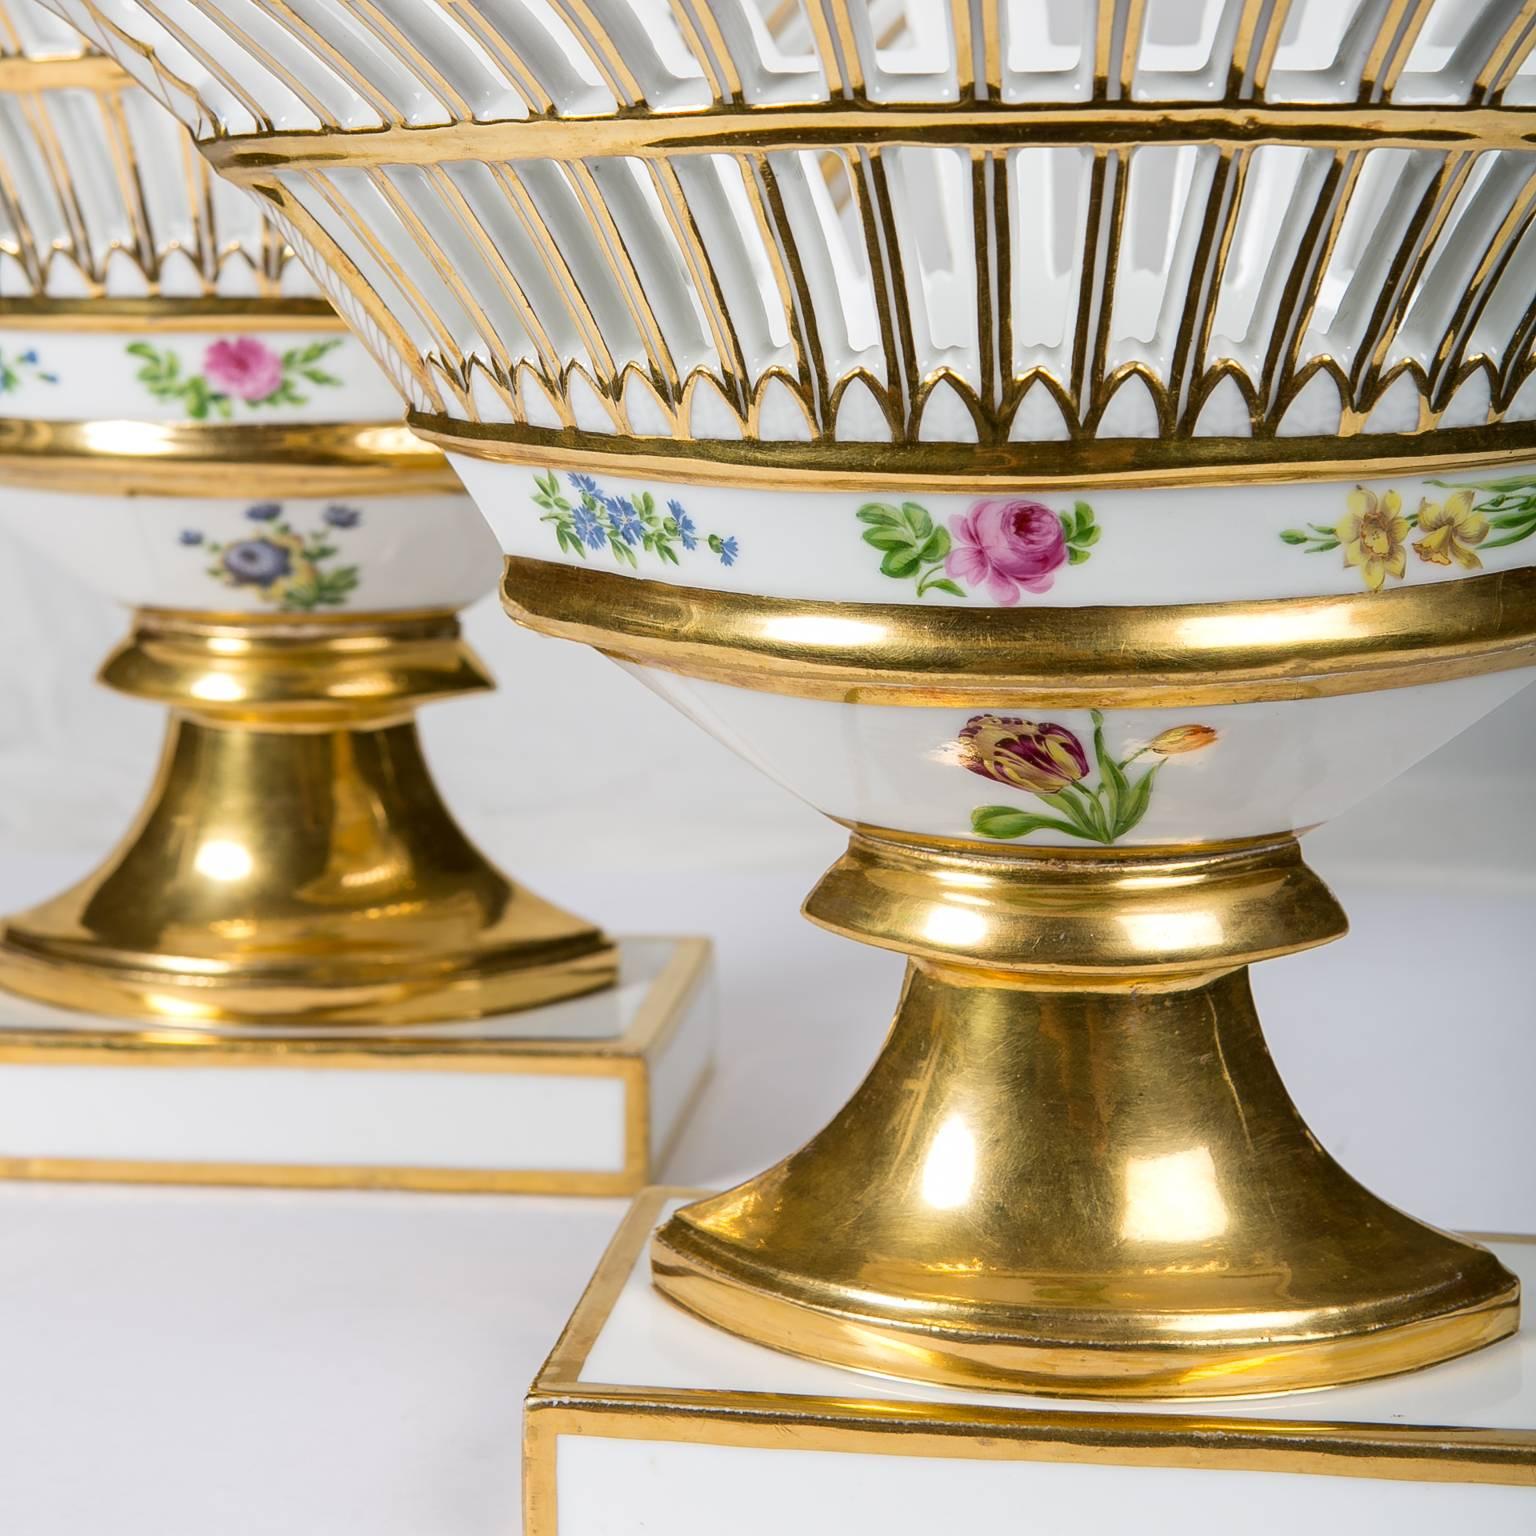 Pair French Gilded Porcelain Baskets 'Corbeilles' Made Mid-19th Century For Sale 4